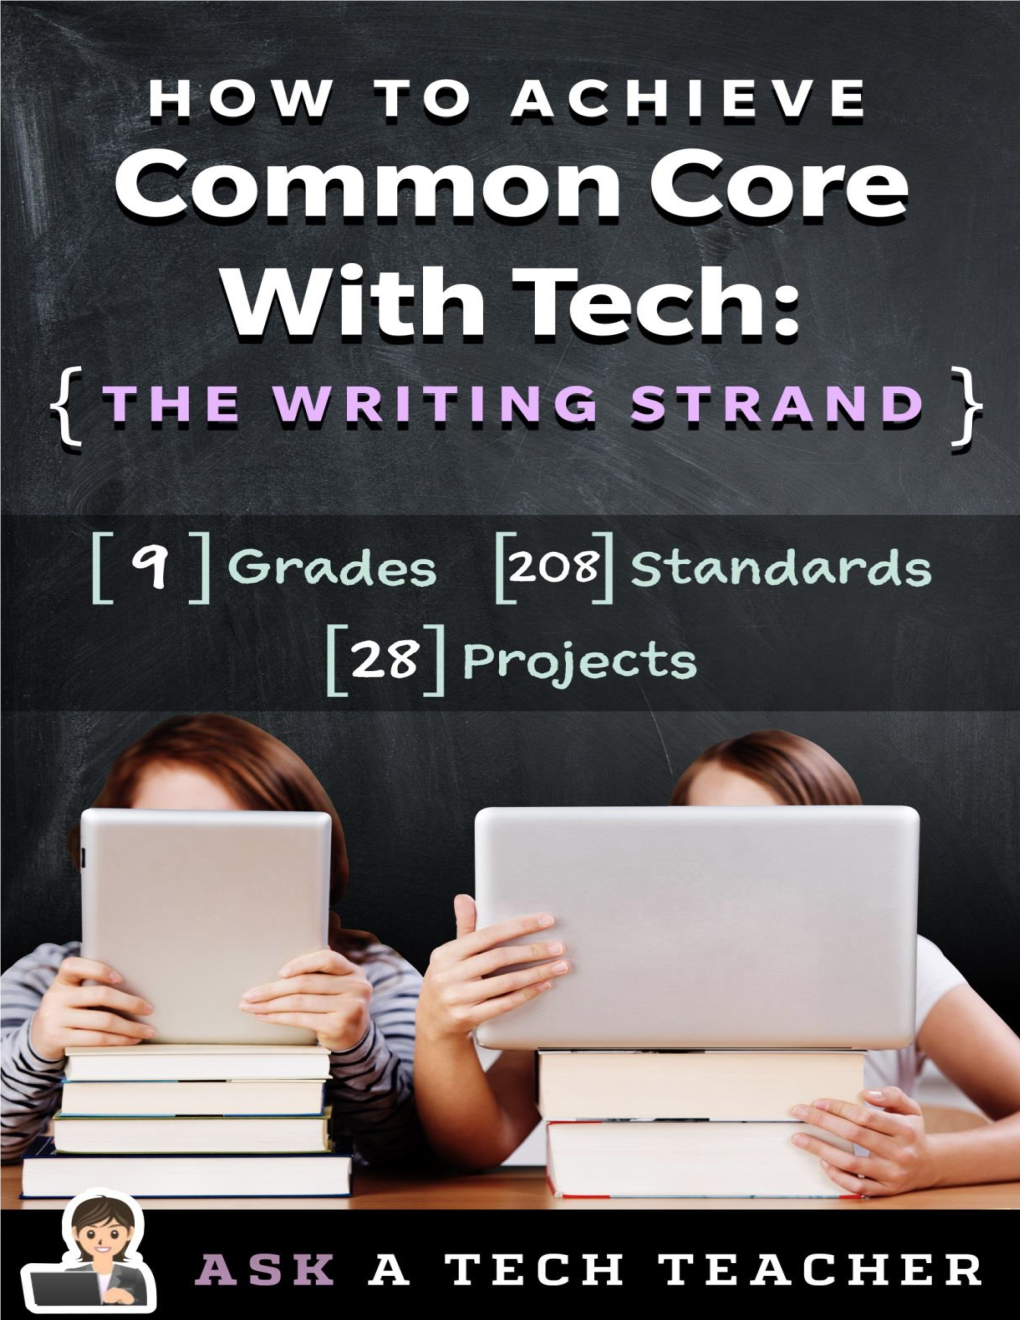 How to Achieve Common Core with Tech the Writing Strand